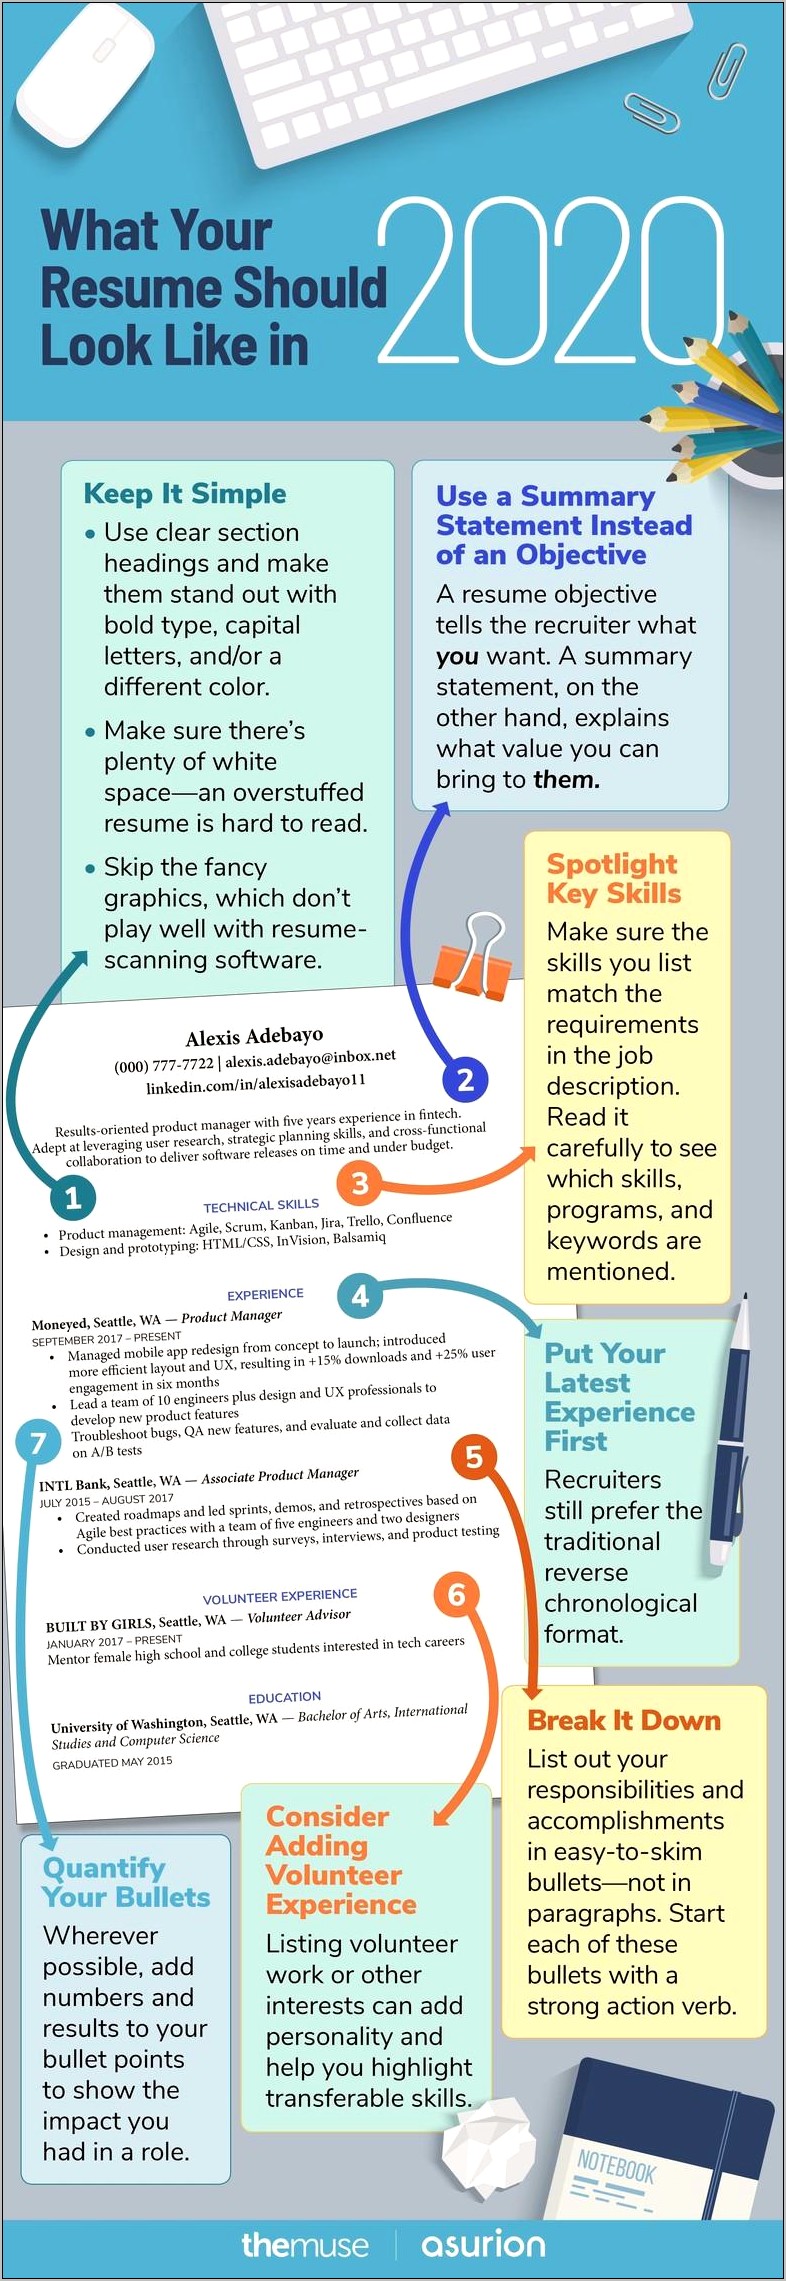 Best Practices For Writing Resumes